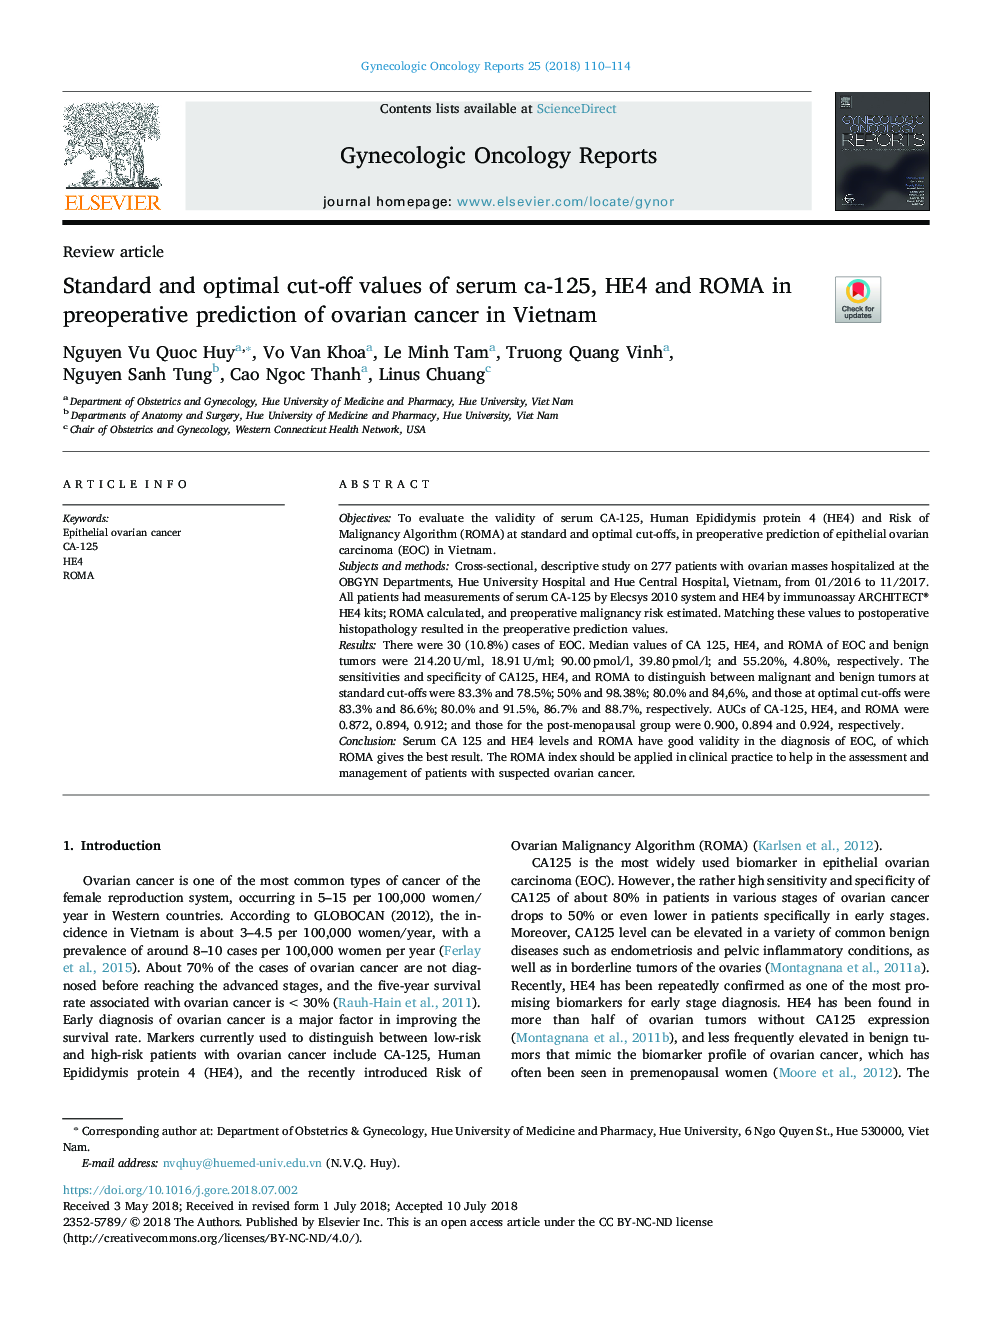 Standard and optimal cut-off values of serum ca-125, HE4 and ROMA in preoperative prediction of ovarian cancer in Vietnam